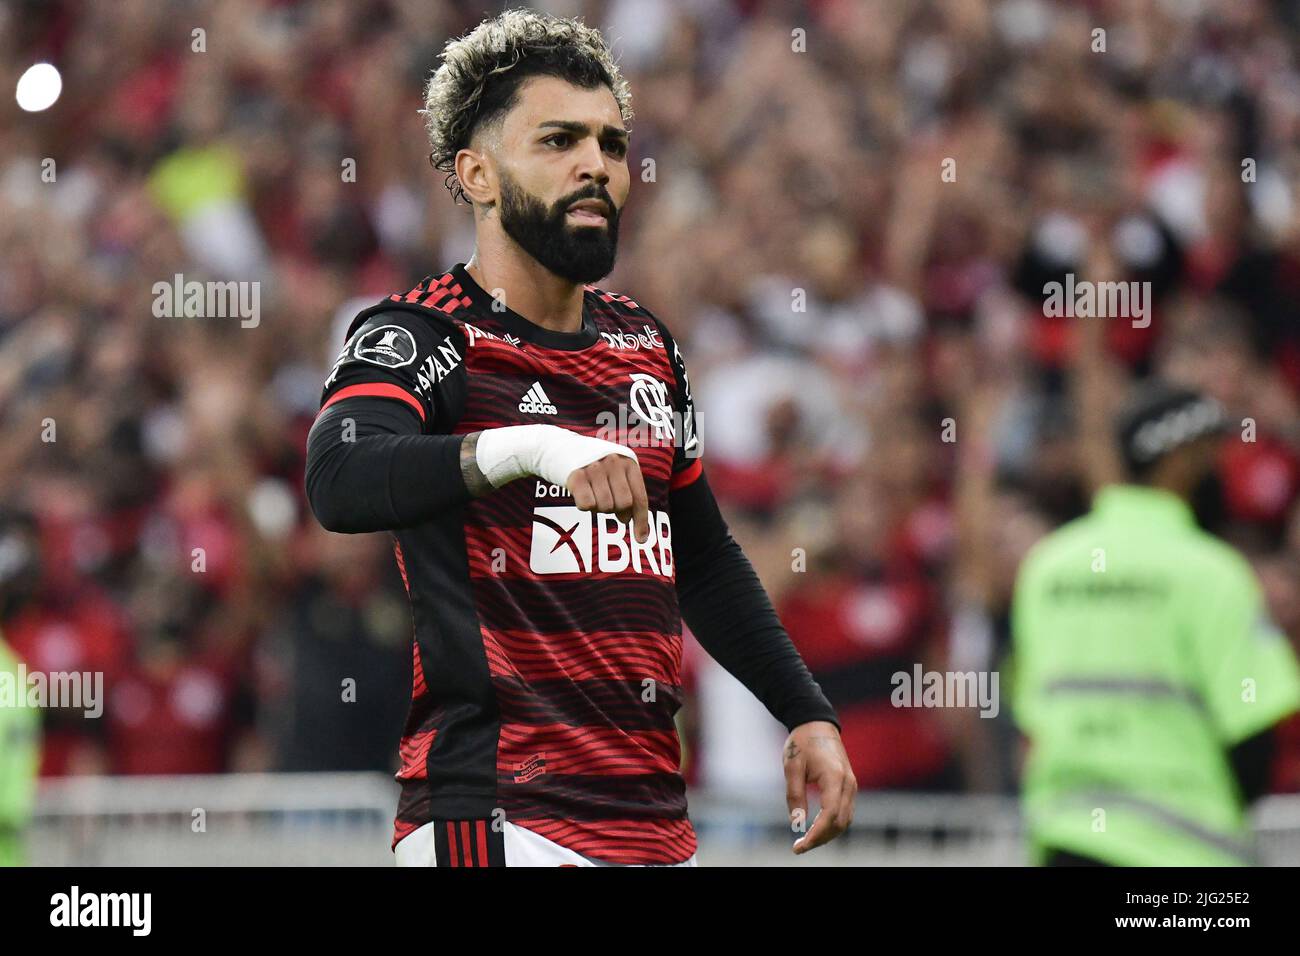 Rio De Janeiro, Brazil. 06th July, 2022. Gabriel Barbosa do Flamengo celebrates his goal during the match between Flamengo and Tolima (COL), for the round of 16 of the Copa Libertadores 2022, at the Maracana Stadium this Wednesday 06. 30761 (Marcello Dias/SPP) Credit: SPP Sport Press Photo. /Alamy Live News Stock Photo